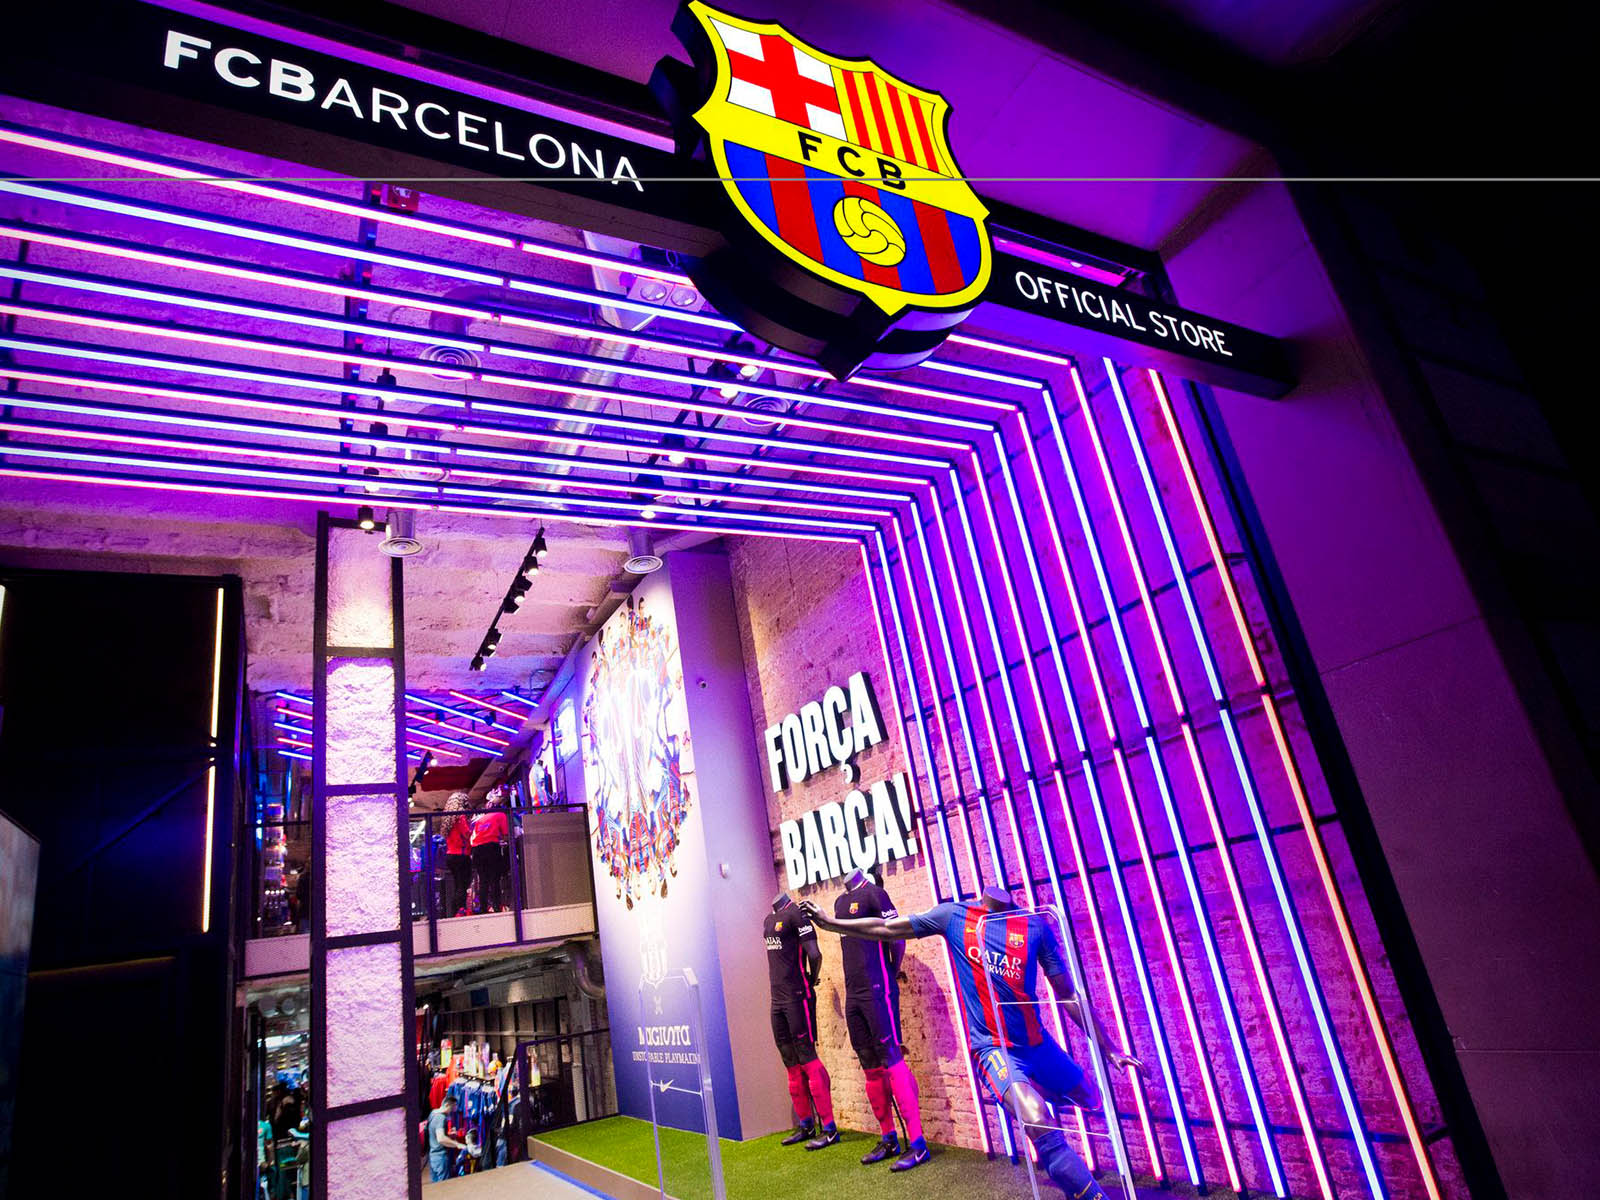 Barcelona opens its first Barça Store in Madrid